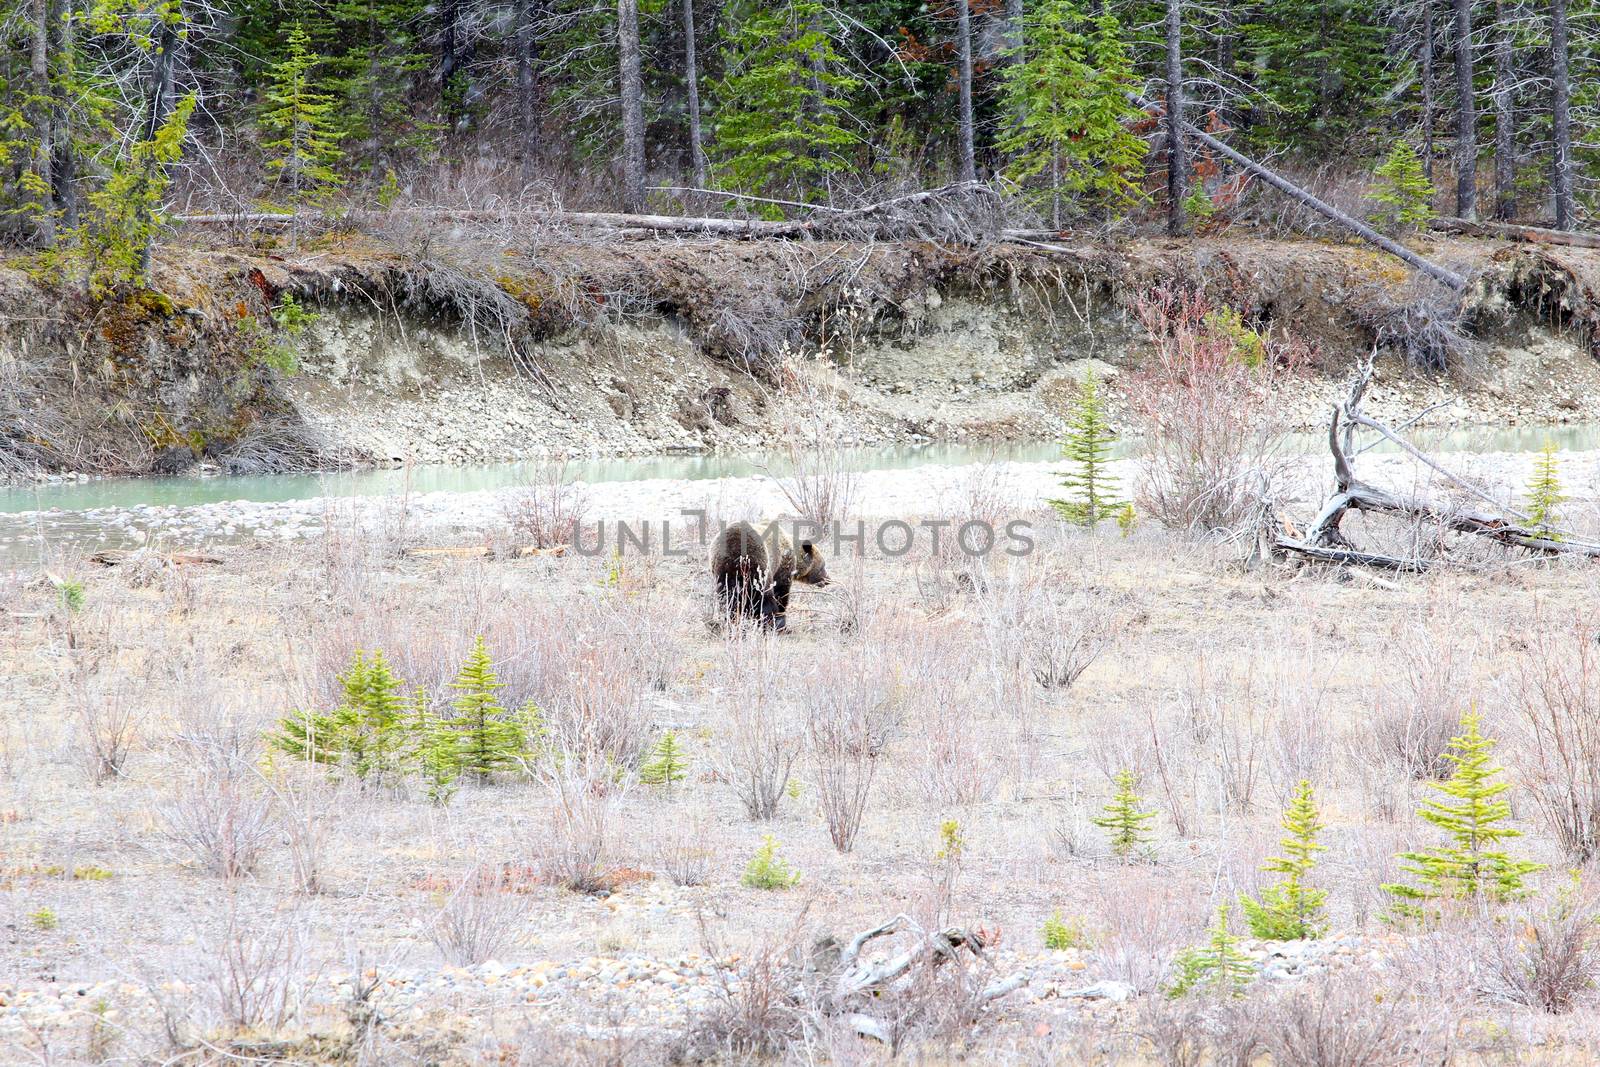 Snow falling with grizzly bear walking by river